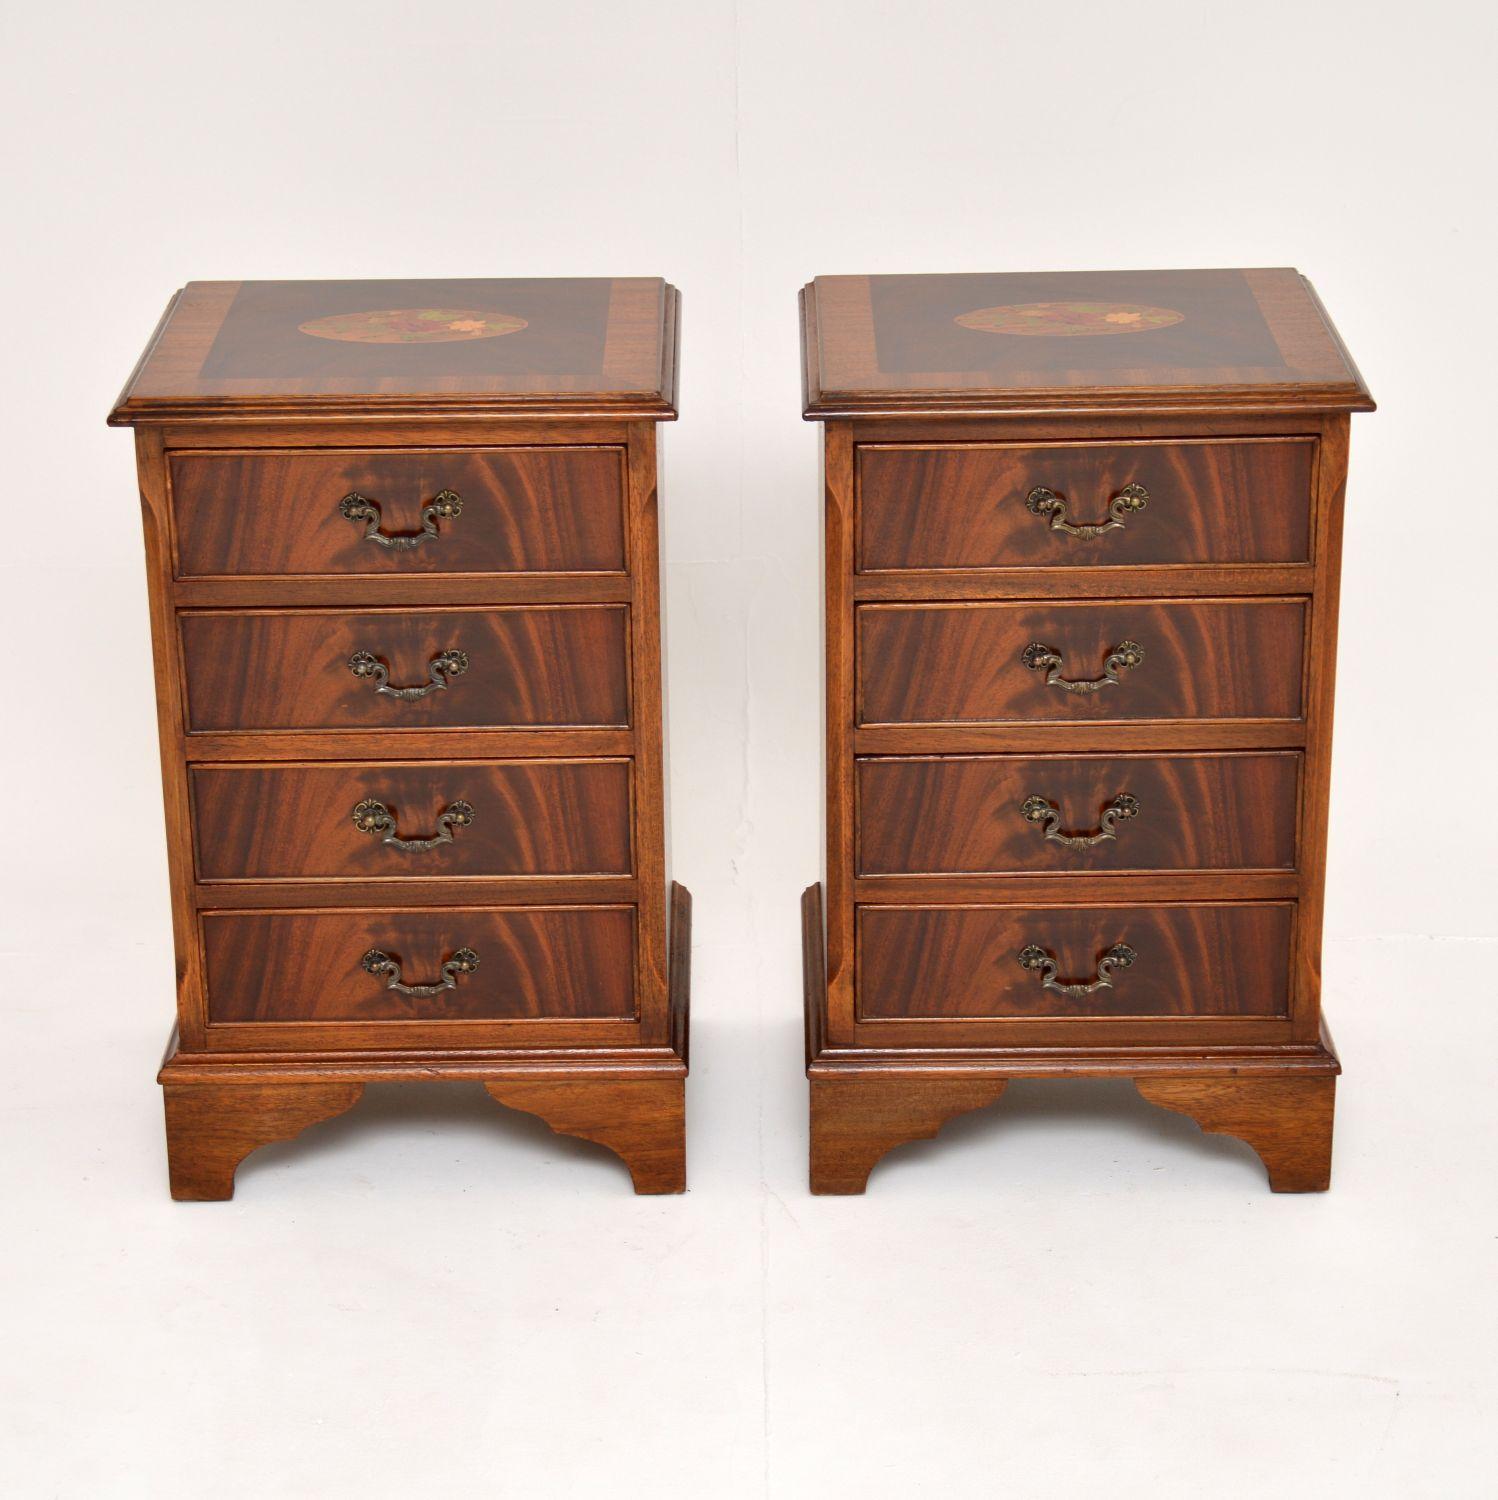 English Pair of Antique Georgian Style Inlaid Bedside Chests